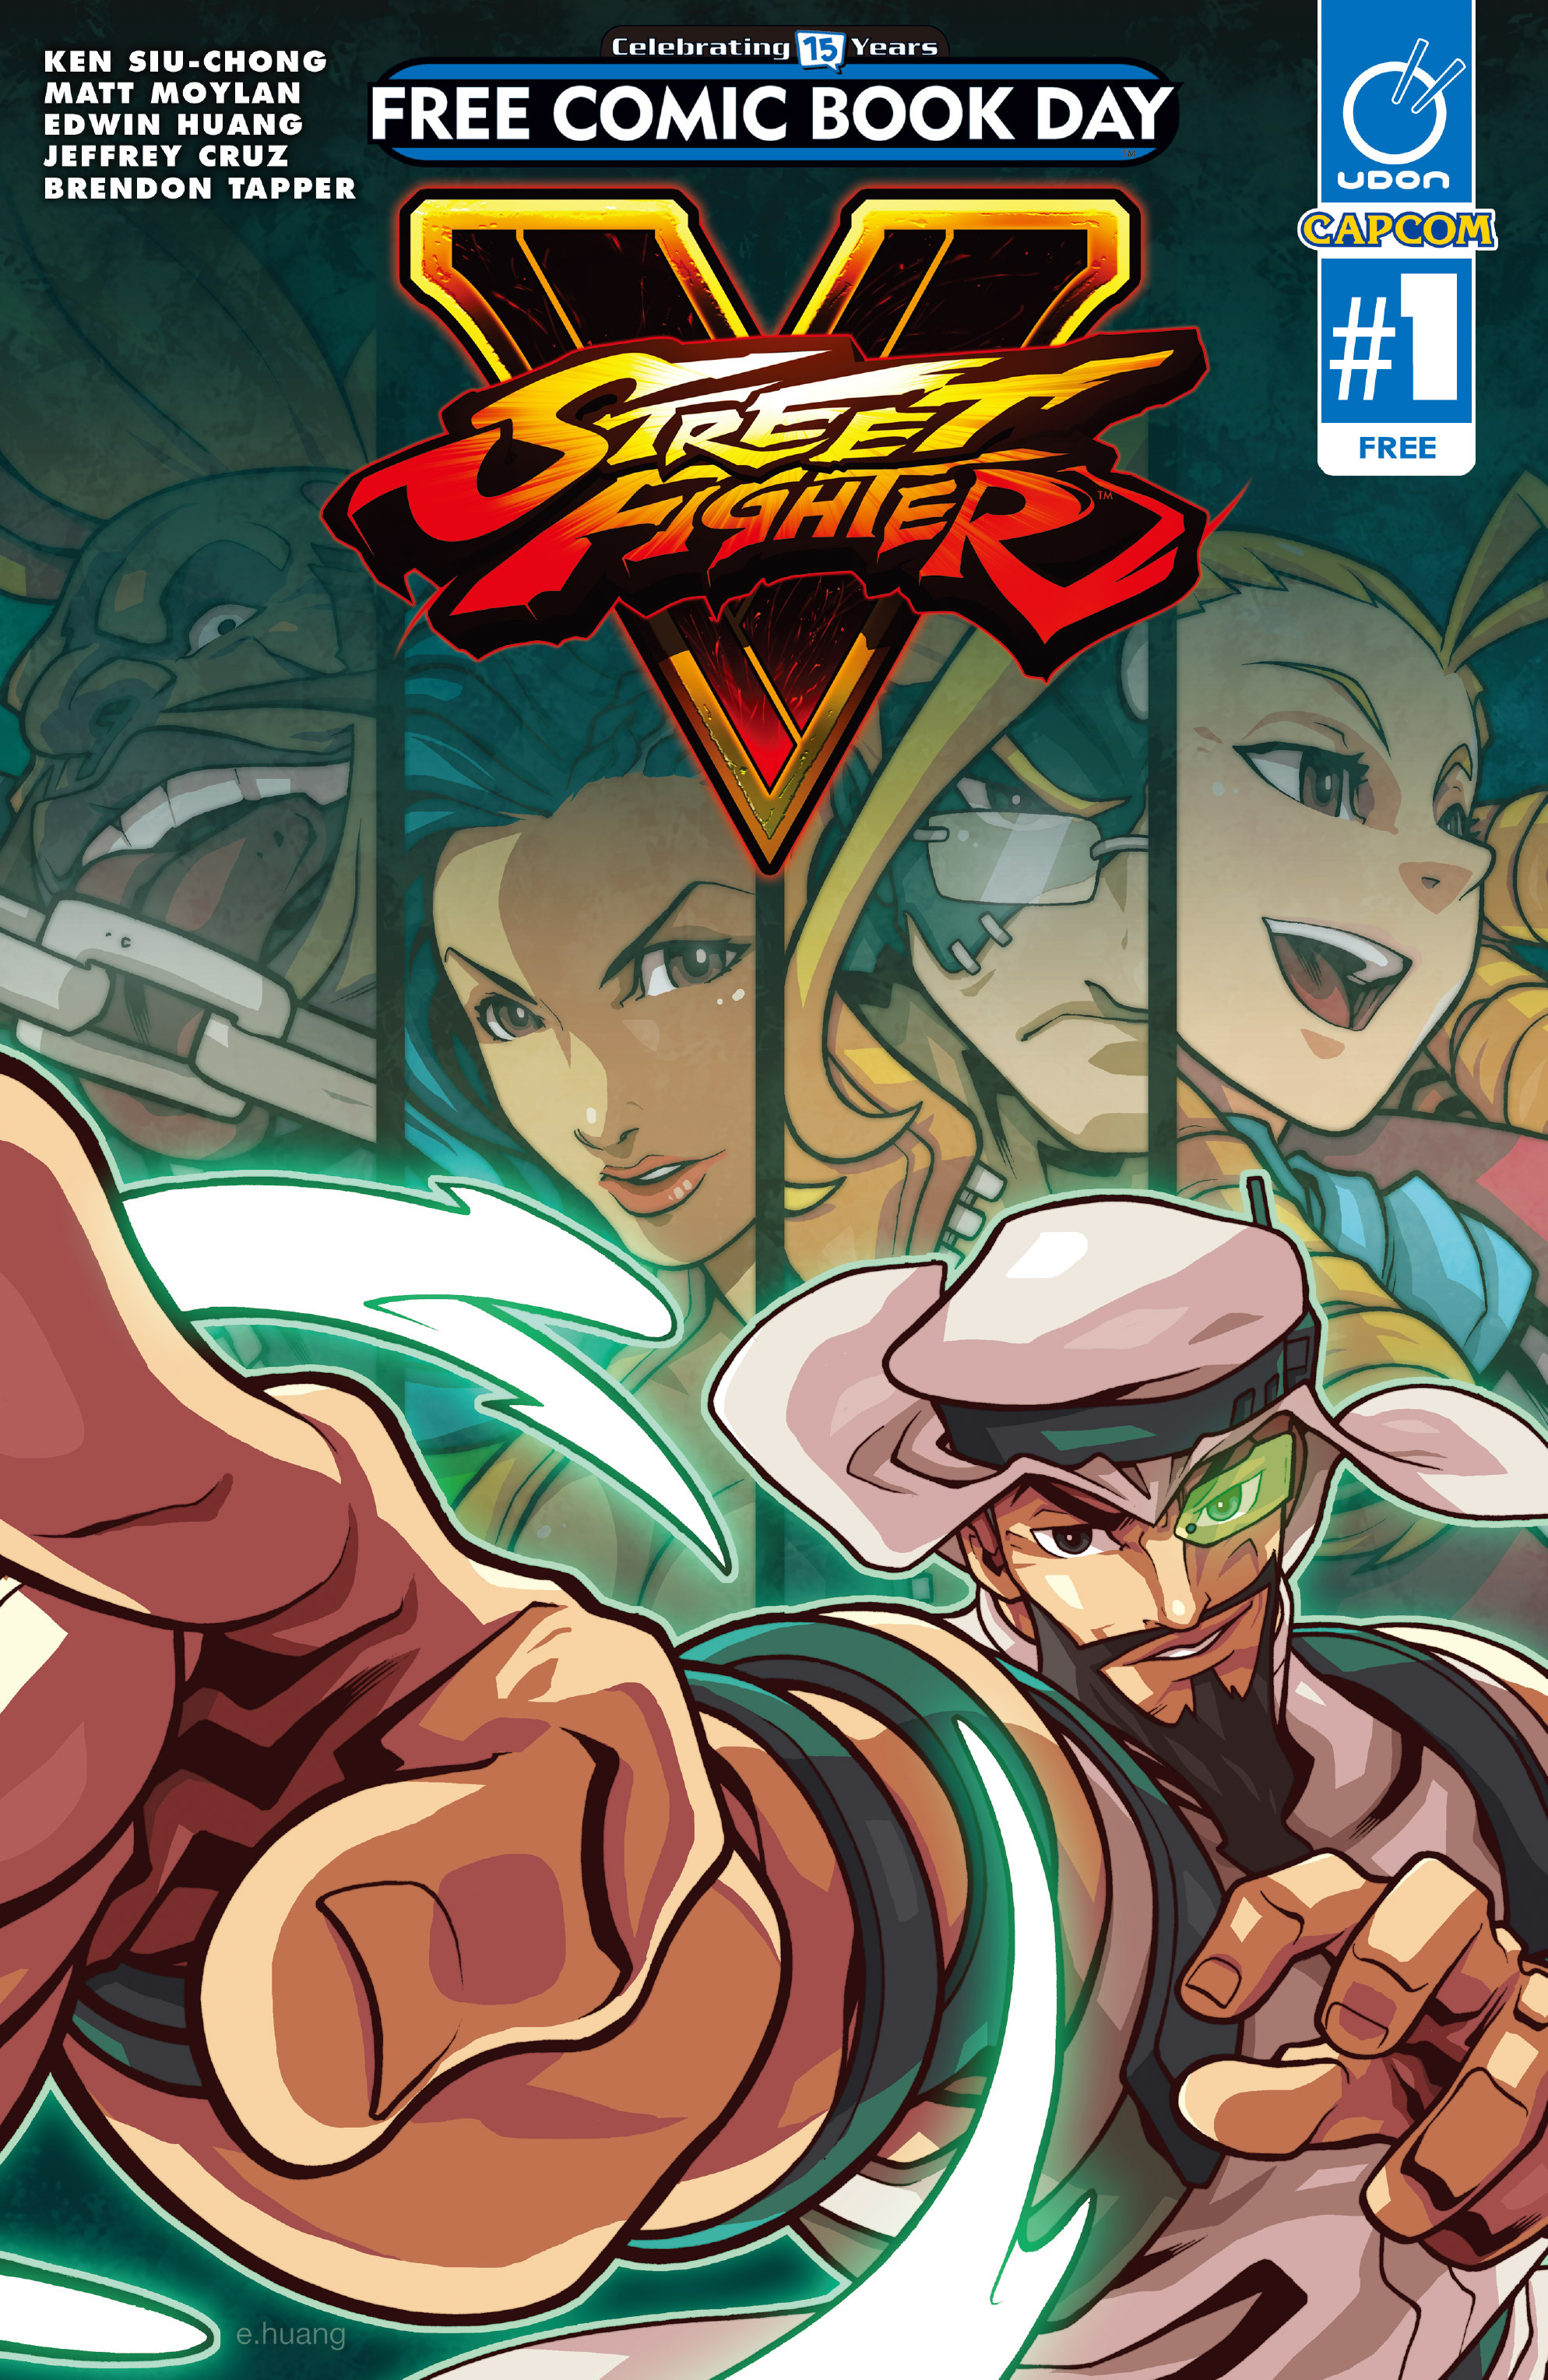 Read online Free Comic Book Day 2016 comic -  Issue # Street Fighter V - 1